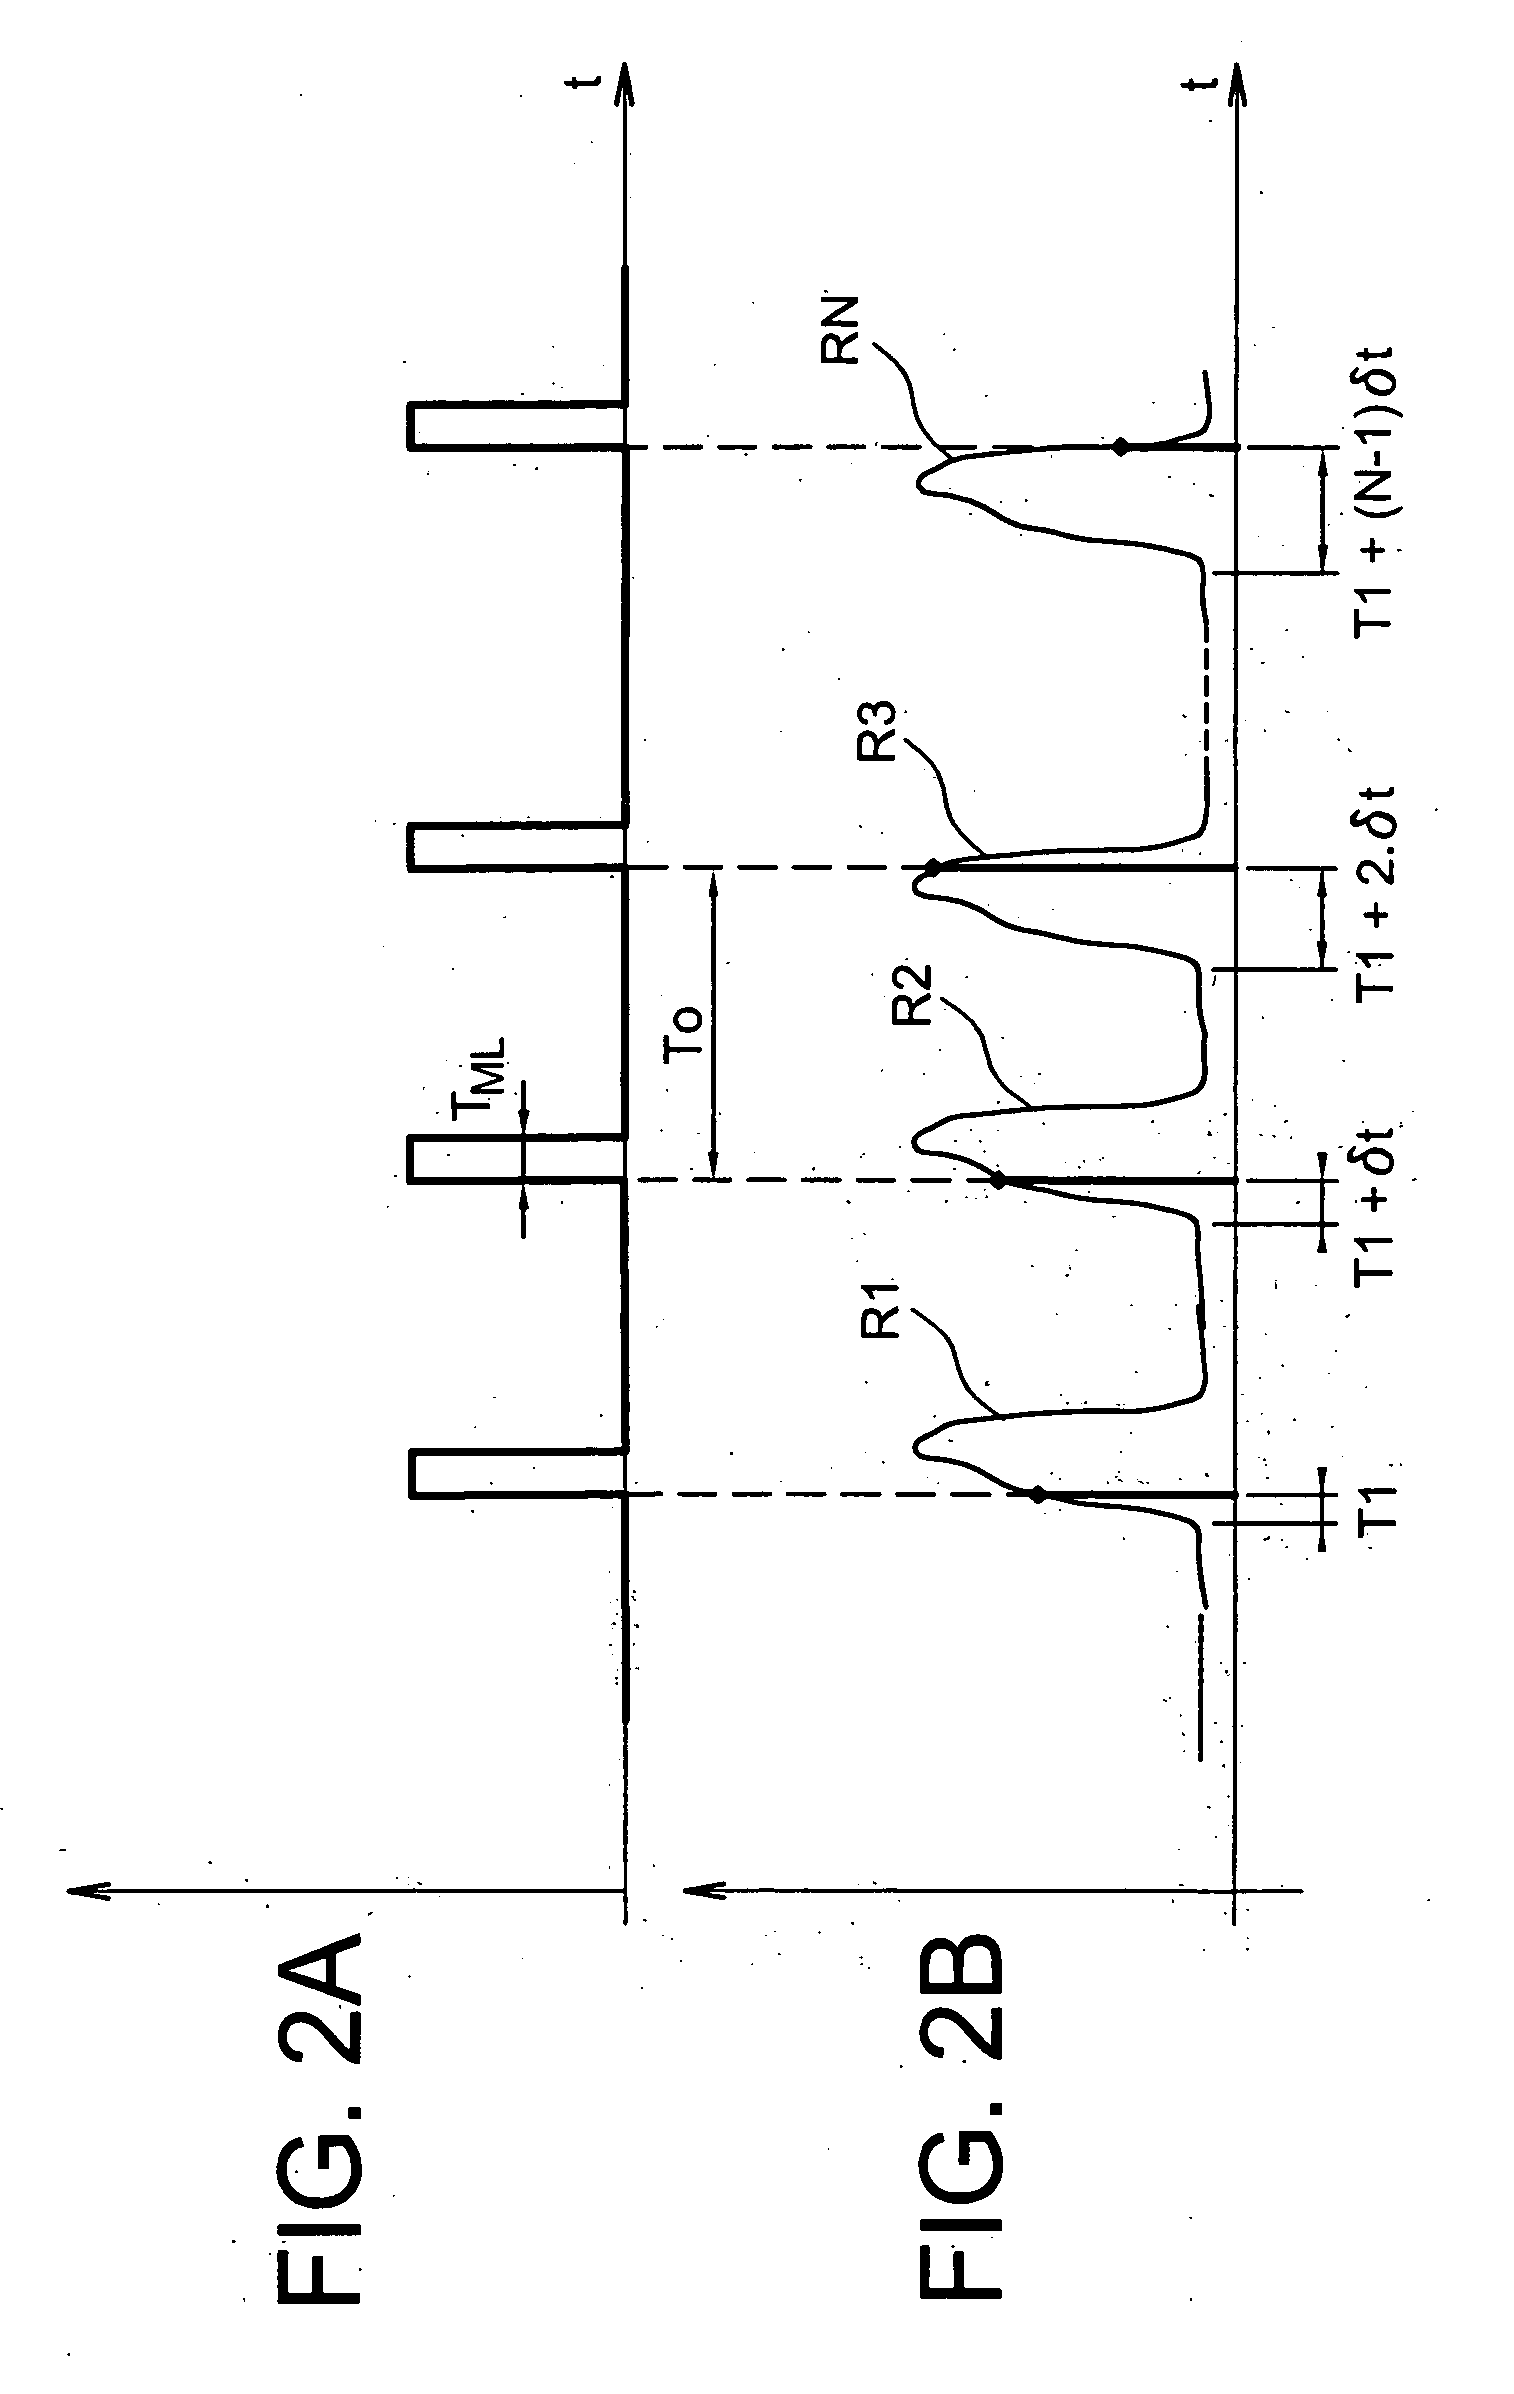 Device For Measuring the Profile of Very Short Single Pulses